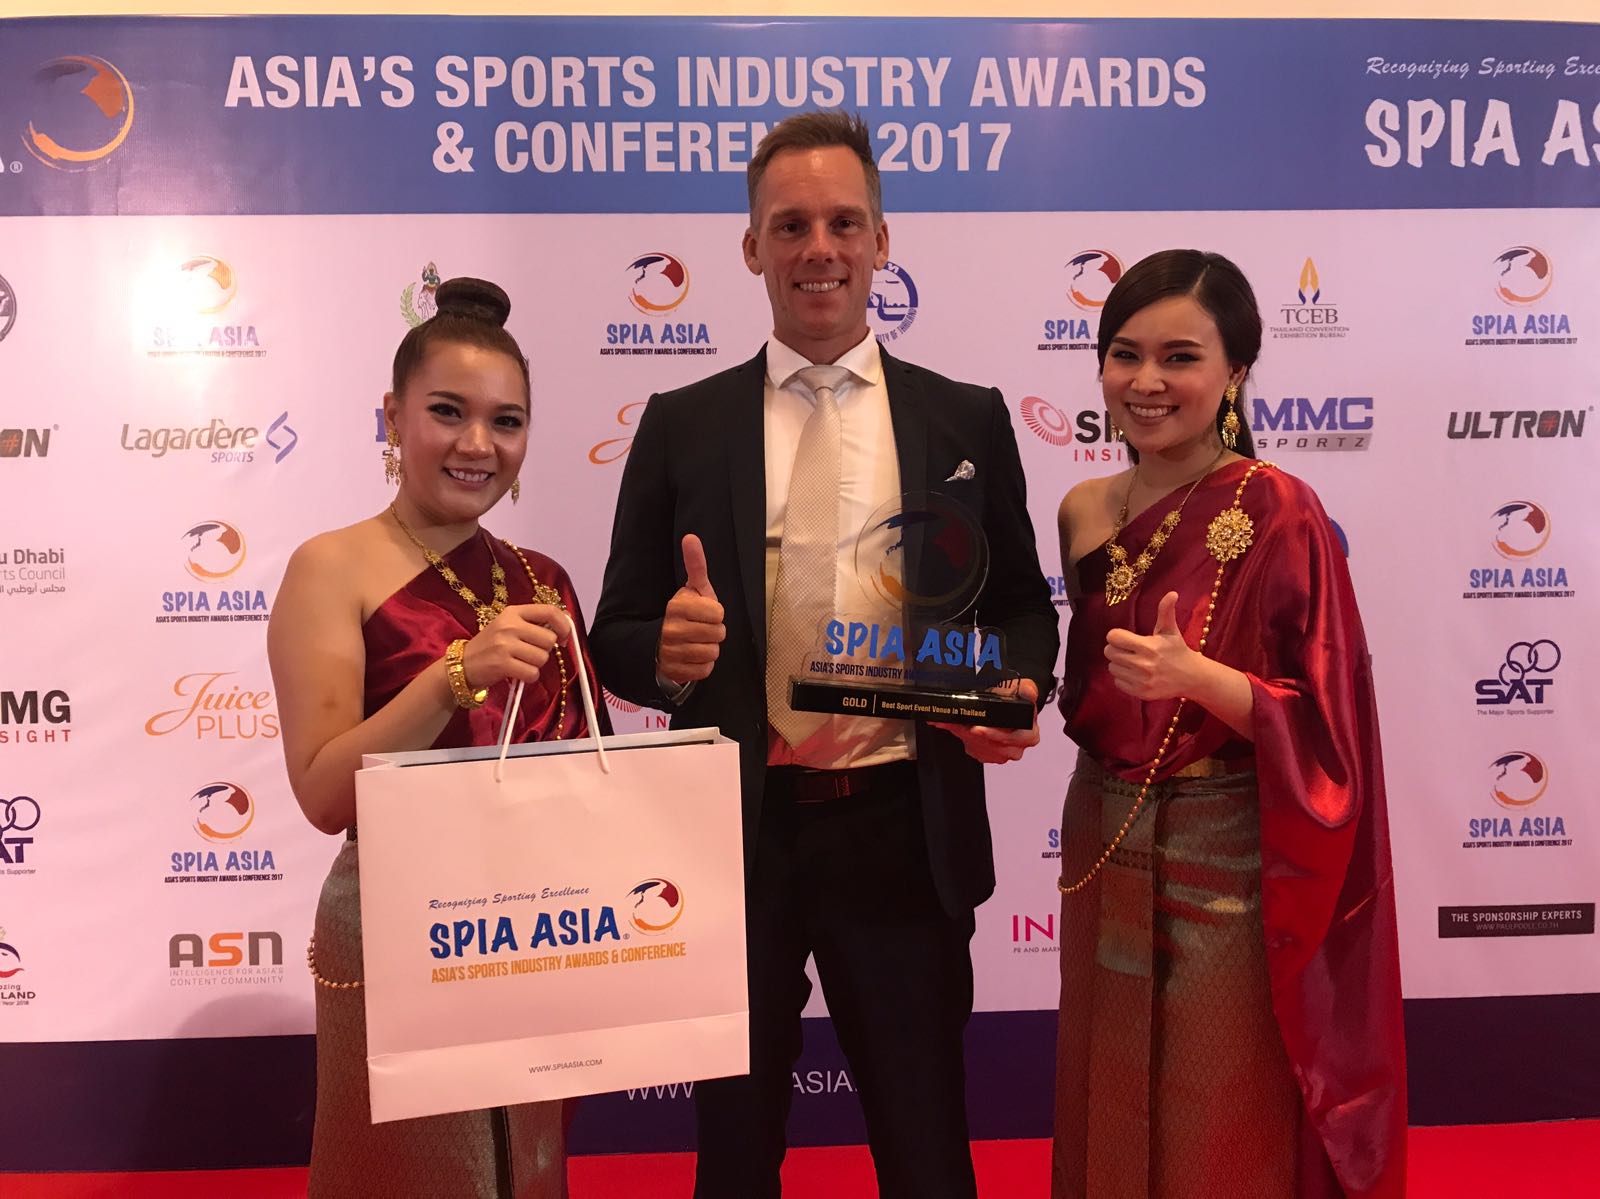 Best sports event Venue in Thailand - Harald Elisson at SPIA Awards